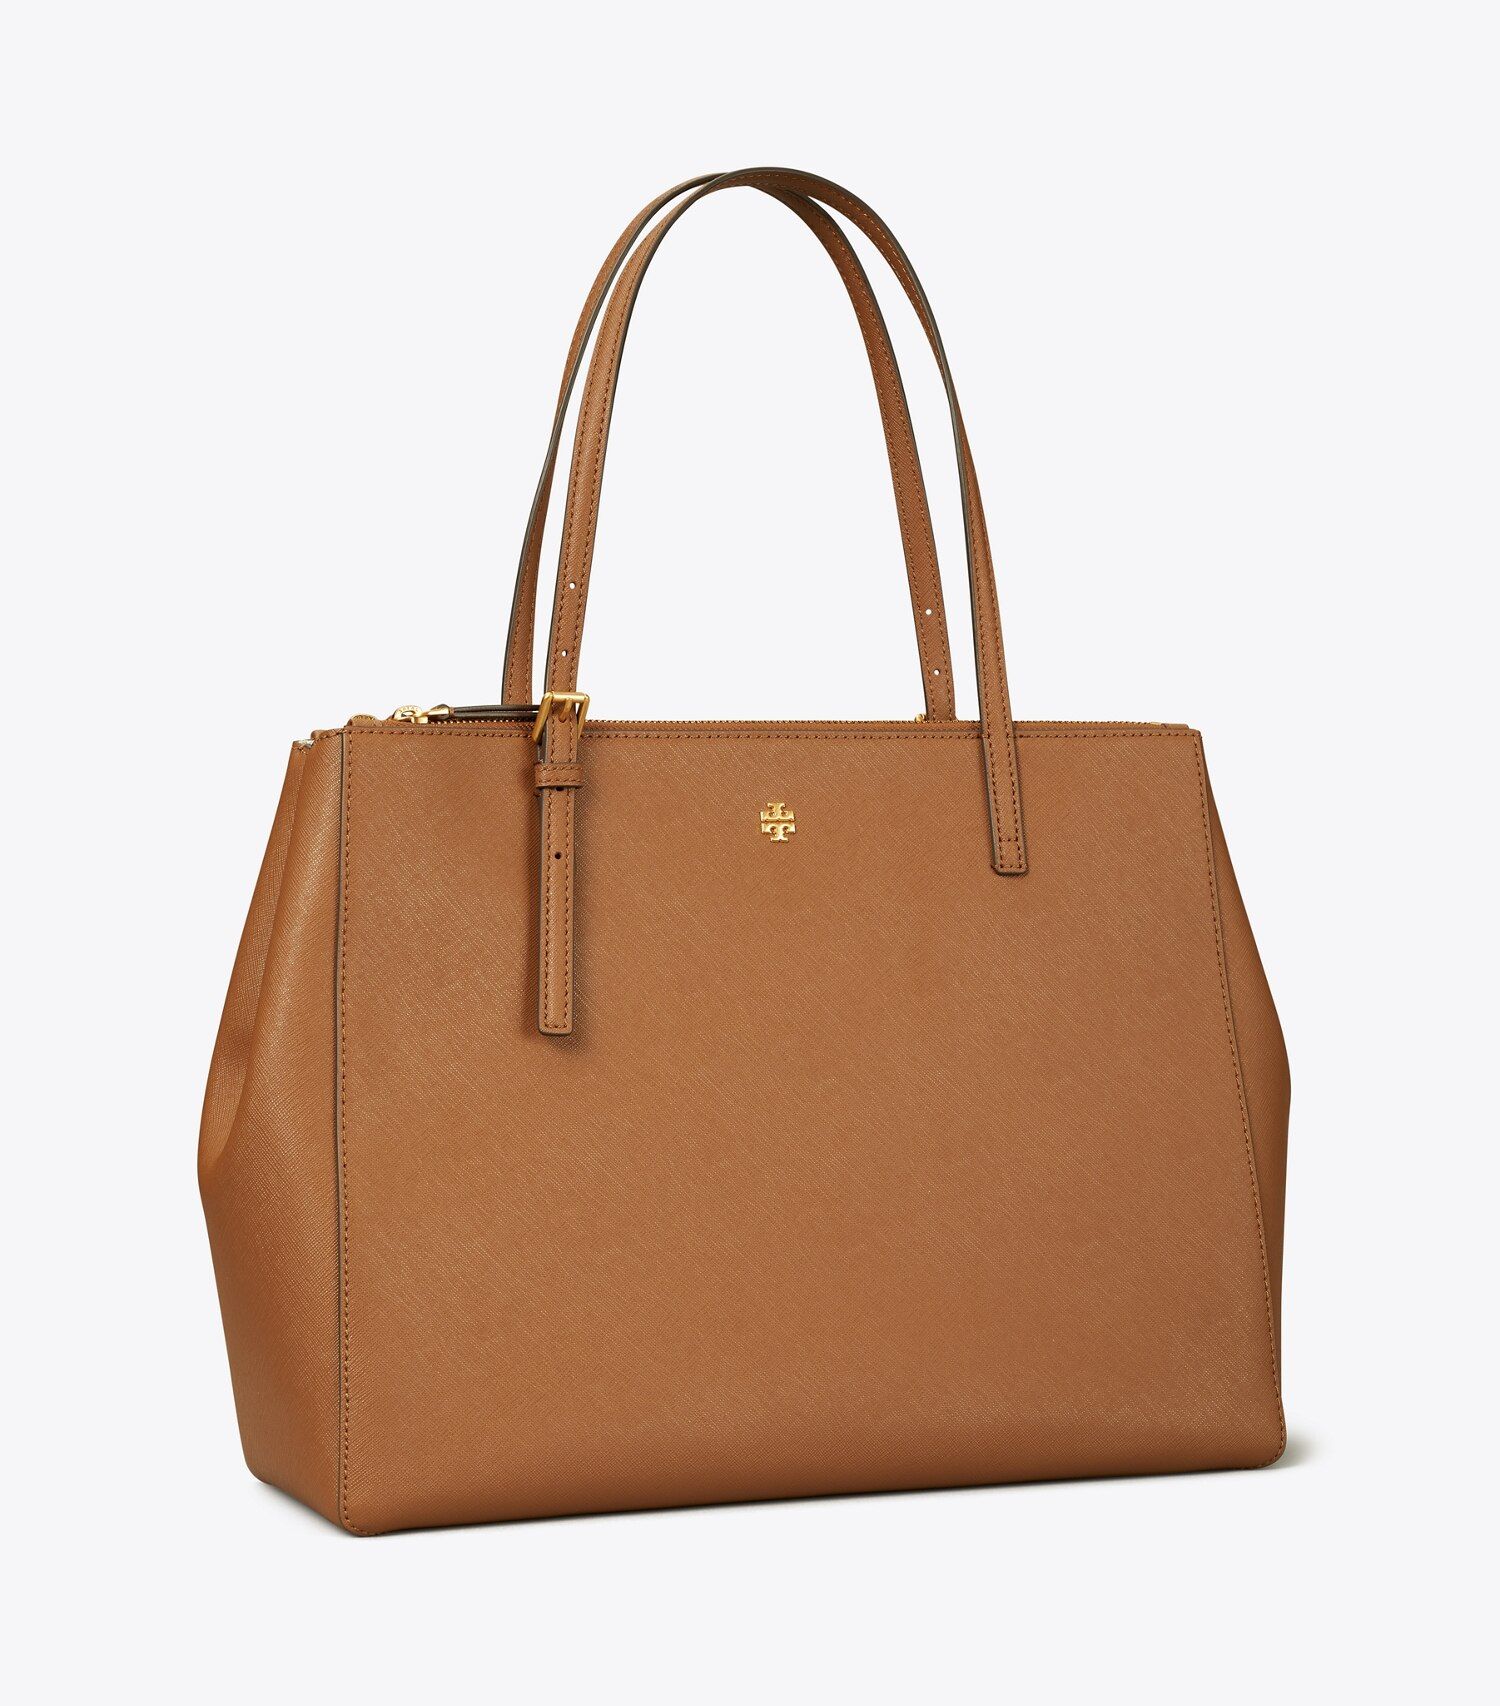 Emerson Large Double Zip Tote: Women's Designer Tote Bags | Tory Burch | Tory Burch (US)